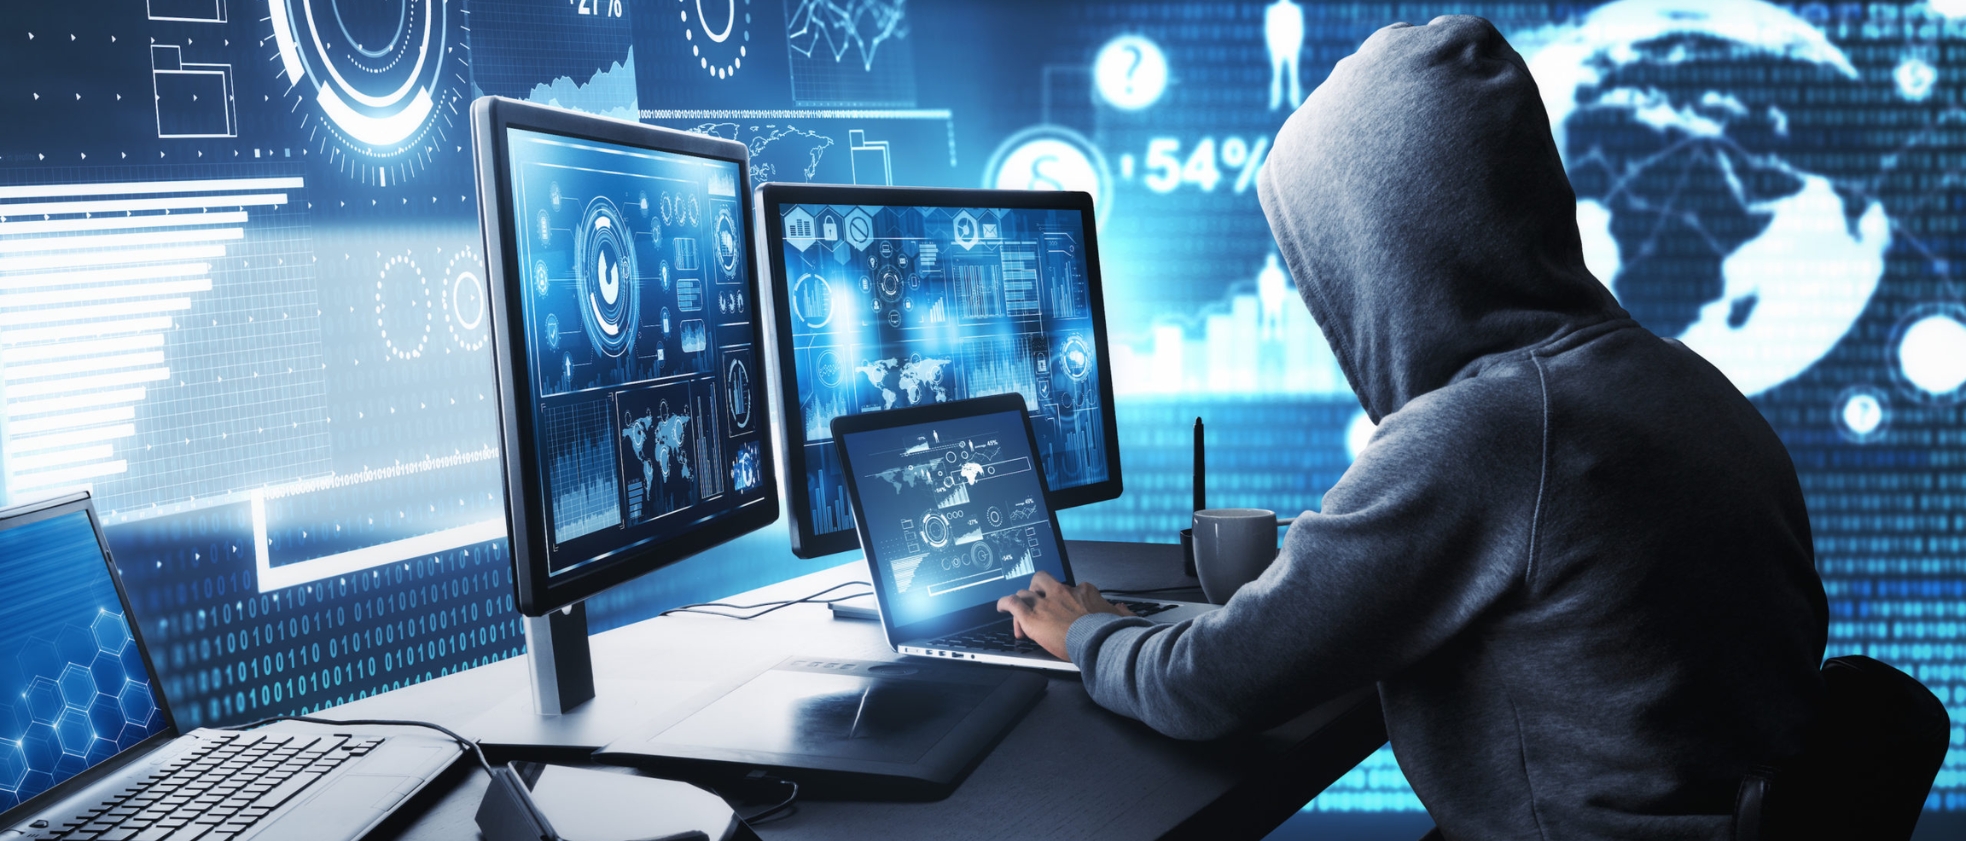 Digital Forensic Investigation Services for Businesses: Benefits and Cost Considerations